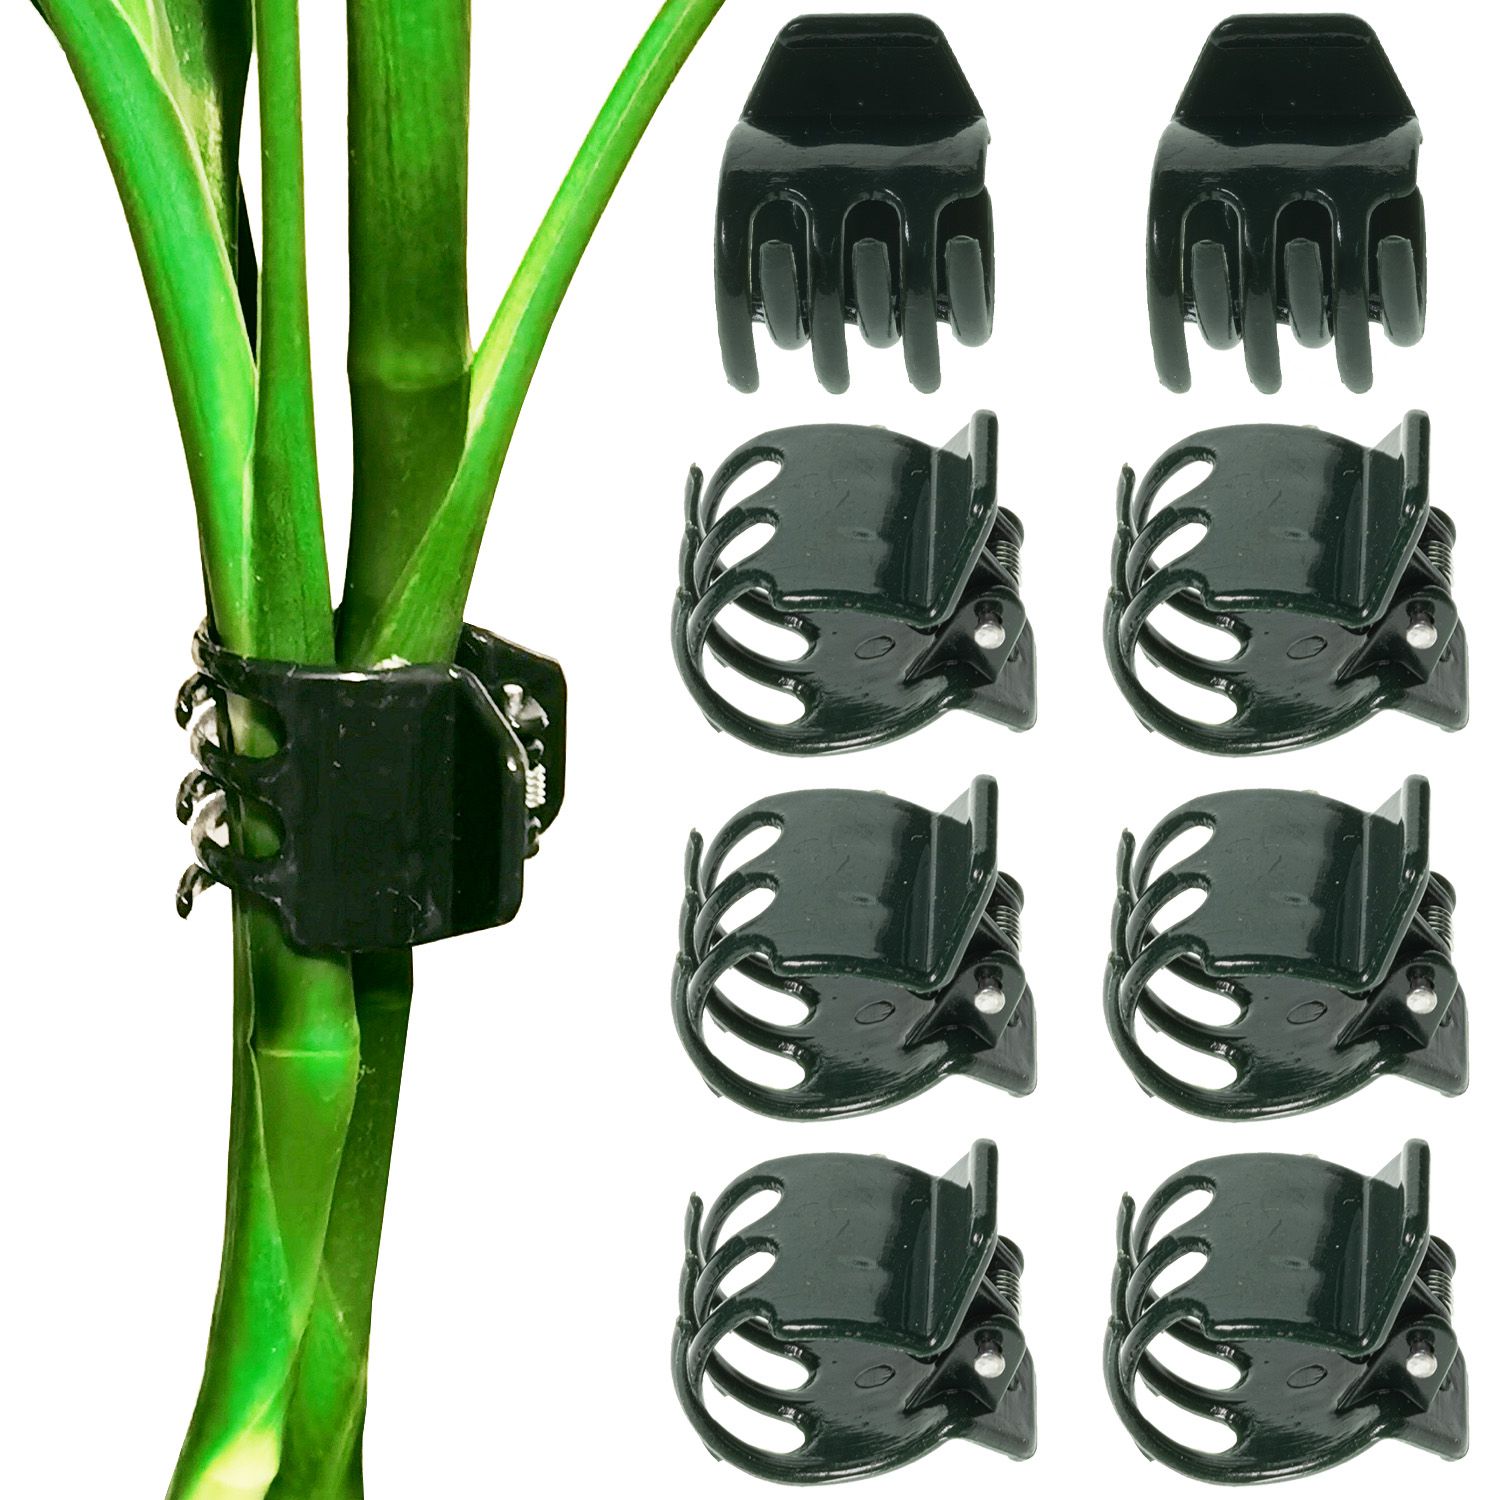 60X Plant Fix Clips Garden Support Clips Orchid Grower Flower Fruit Vine Support 